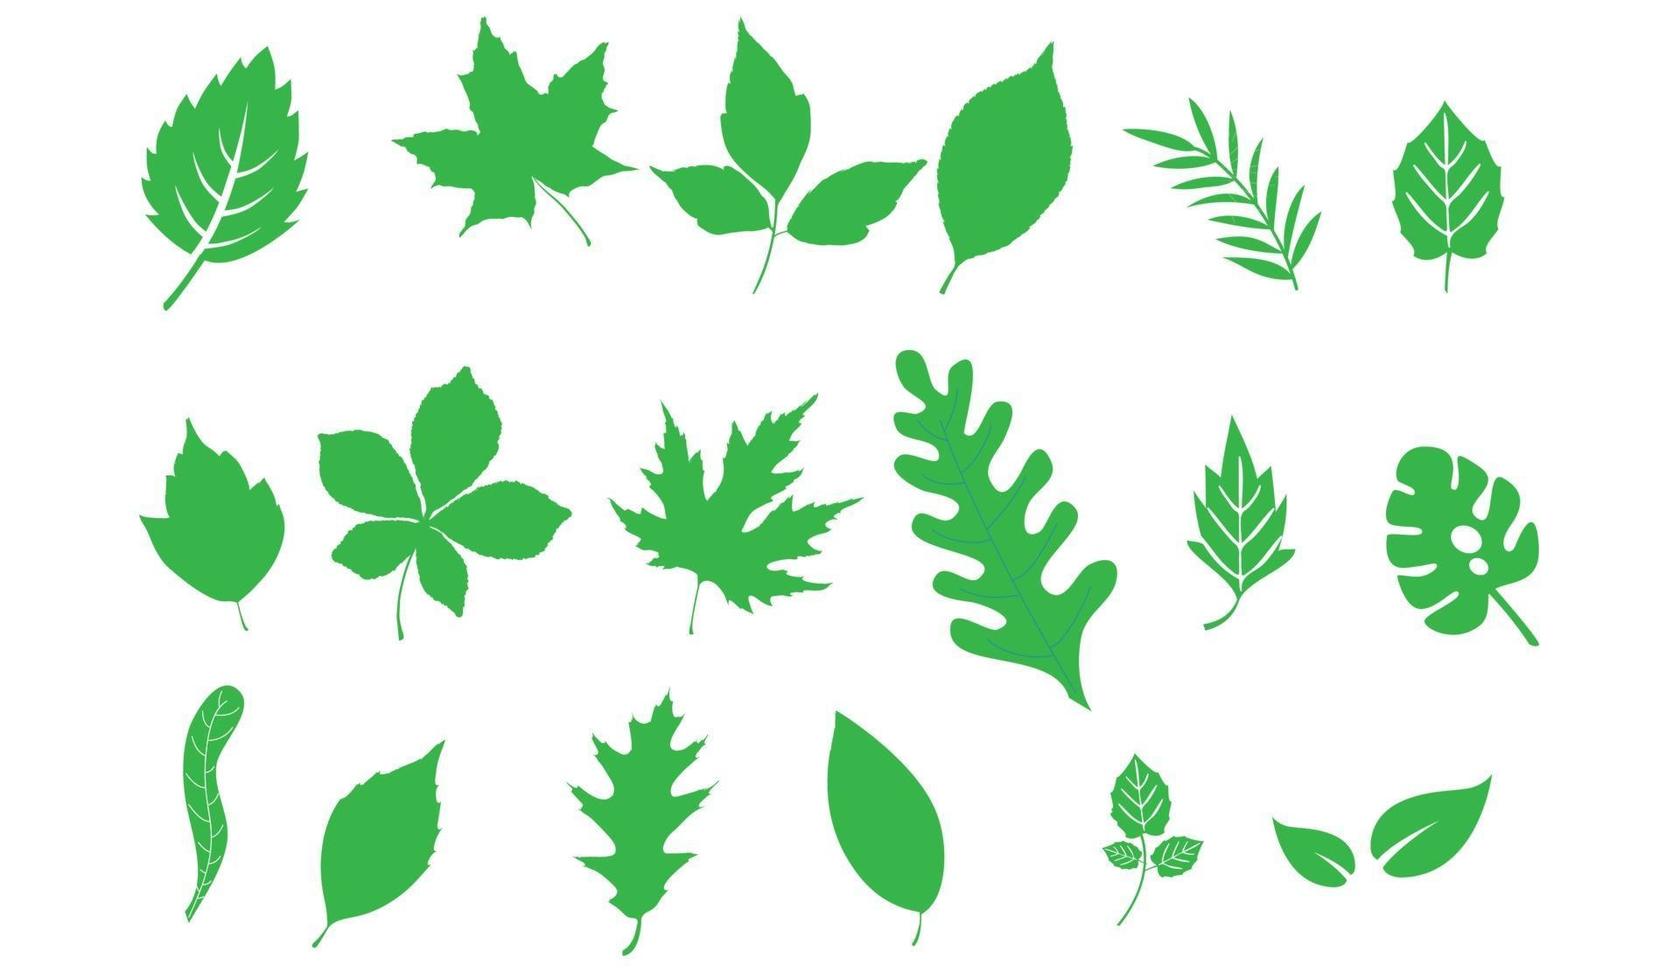 Leafs green set. Green leaf ecology nature element symbol isolated vector